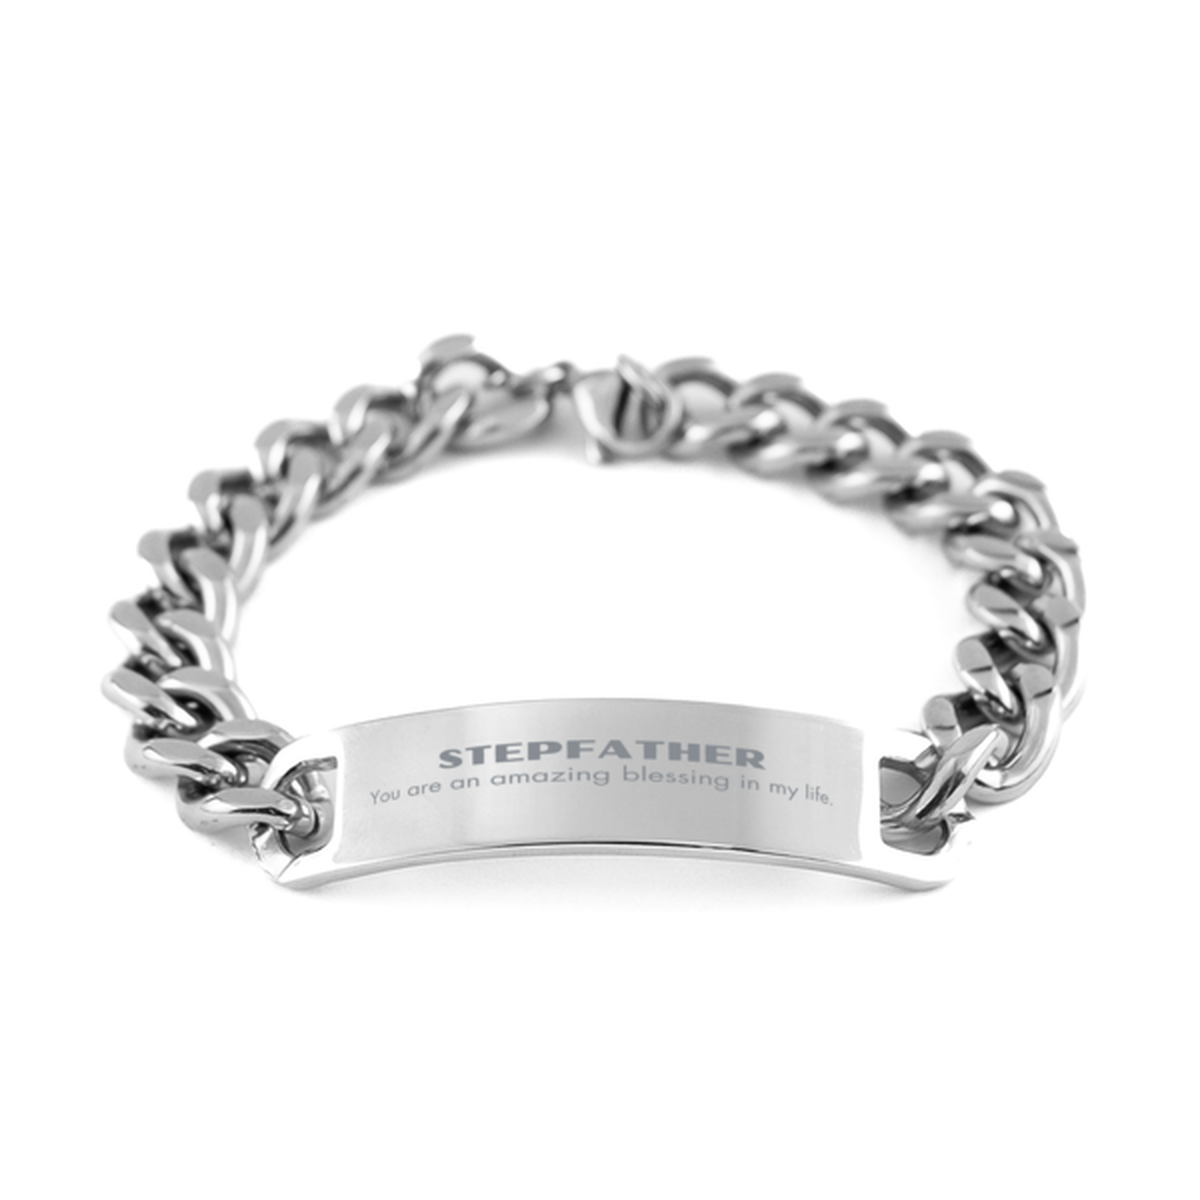 Stepfather Cuban Chain Stainless Steel Bracelet, You are an amazing blessing in my life, Thank You Gifts For Stepfather, Inspirational Birthday Christmas Unique Gifts For Stepfather